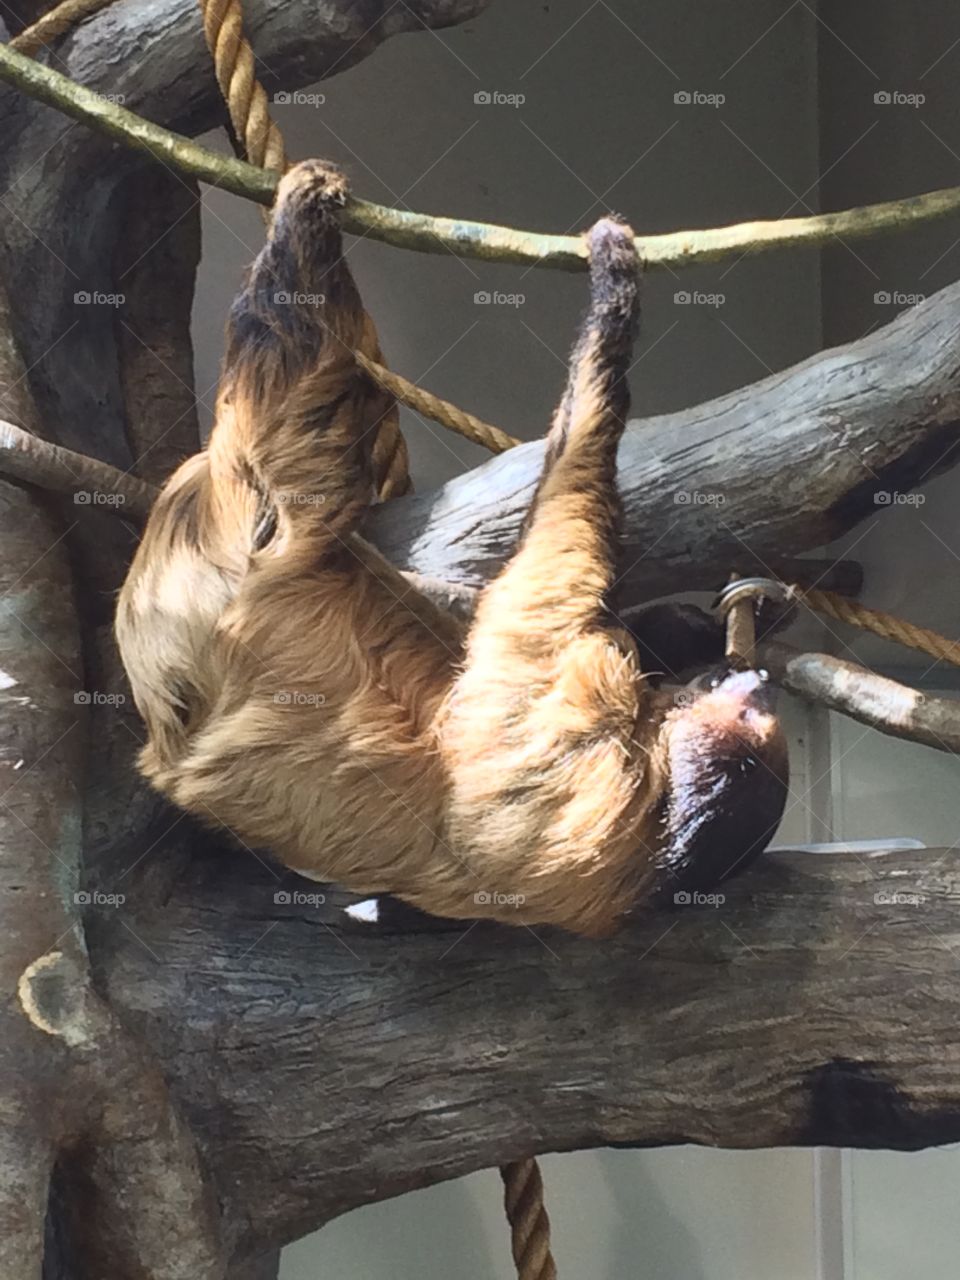 Sloth at the NC Museum of National Sciences